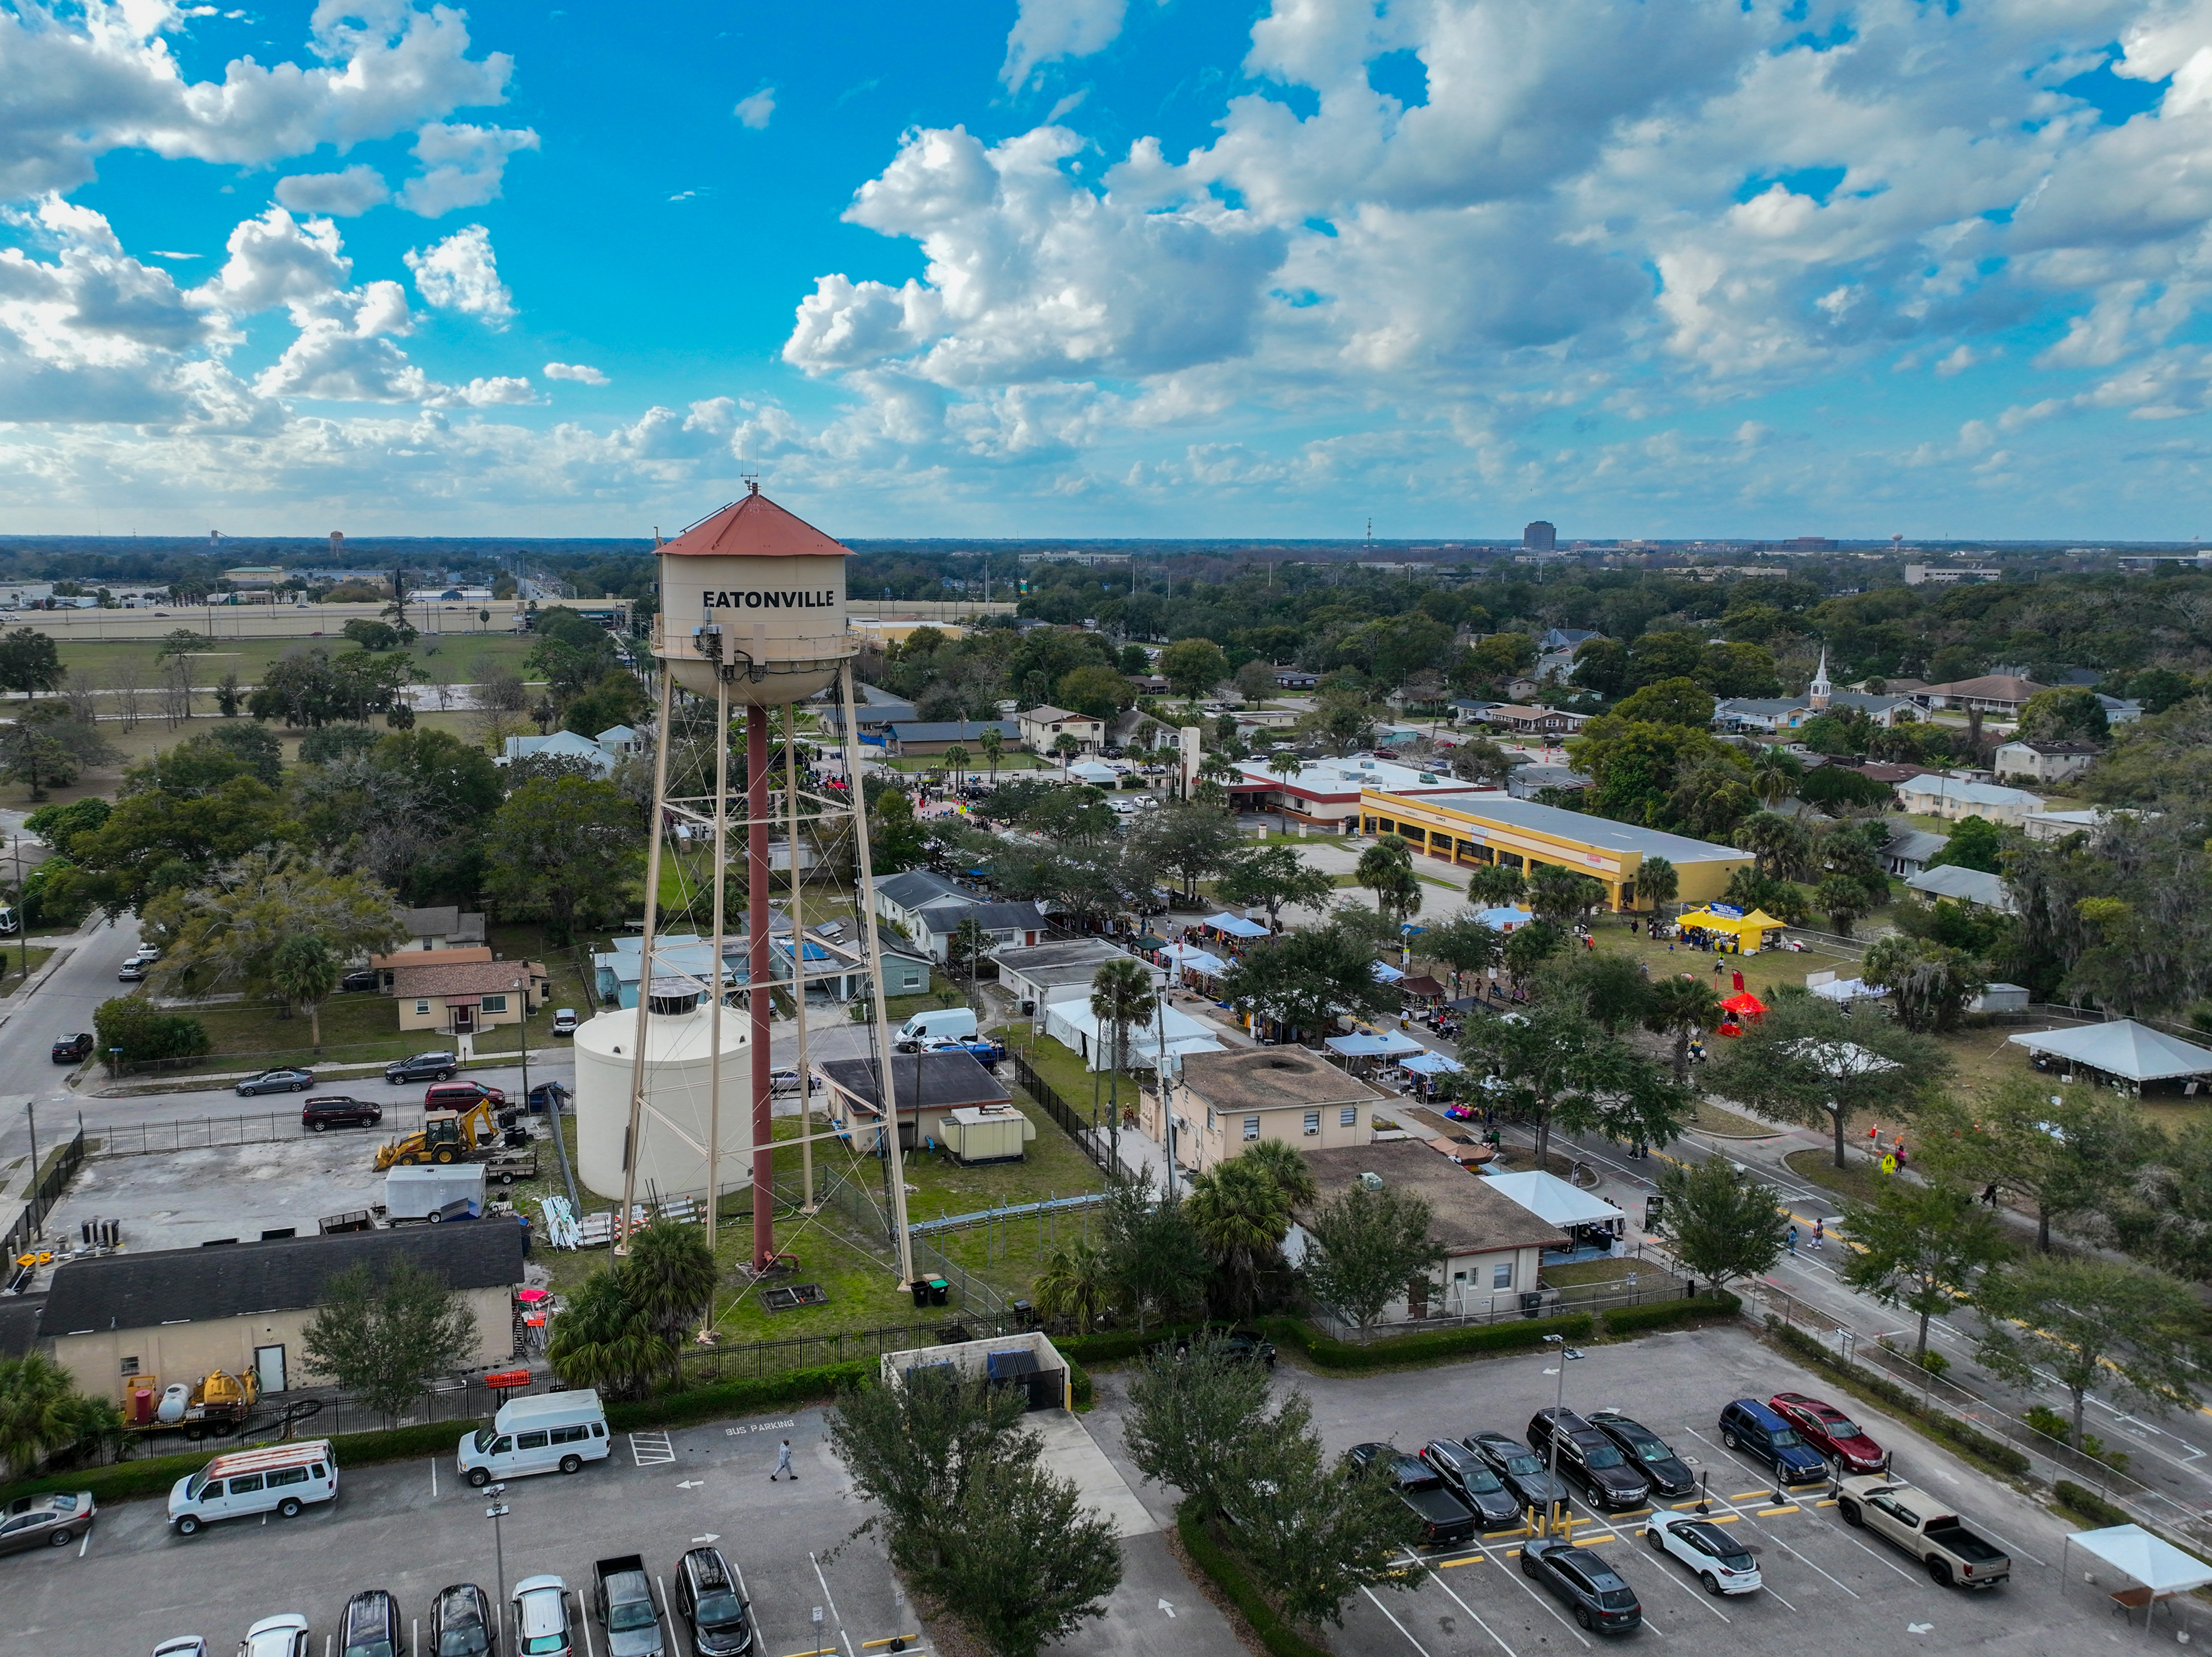 Panoramic view of town of Eatonville, Florida with water tower in background.